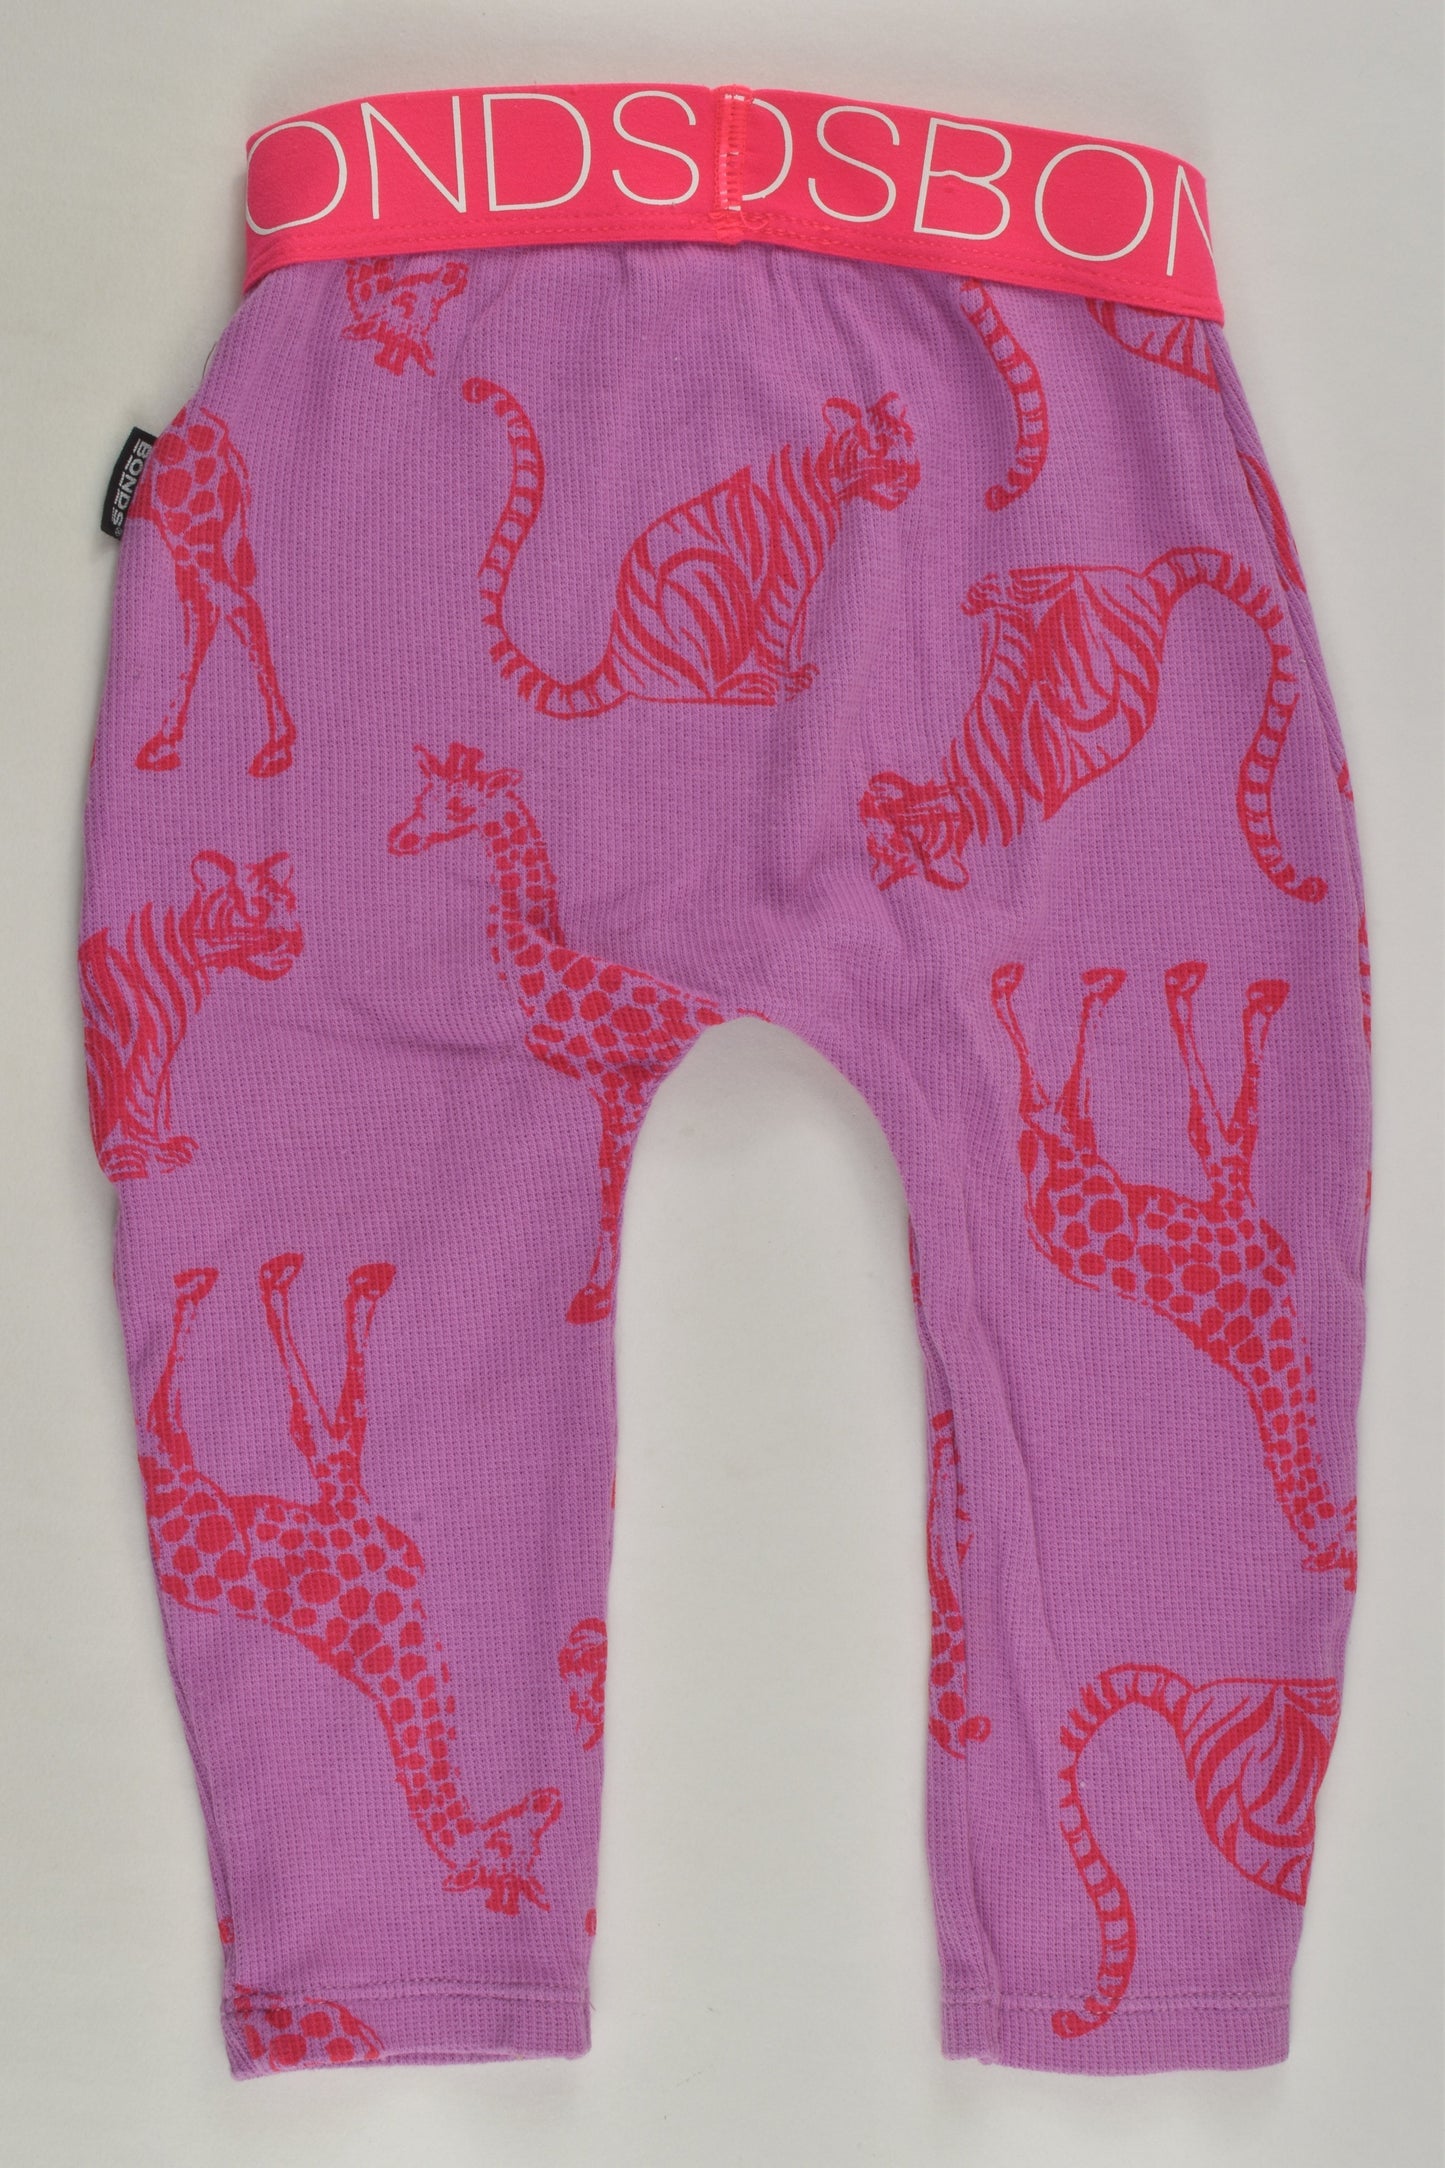 Bonds Size 0 Ribbed Giraffes and Tigers Leggings